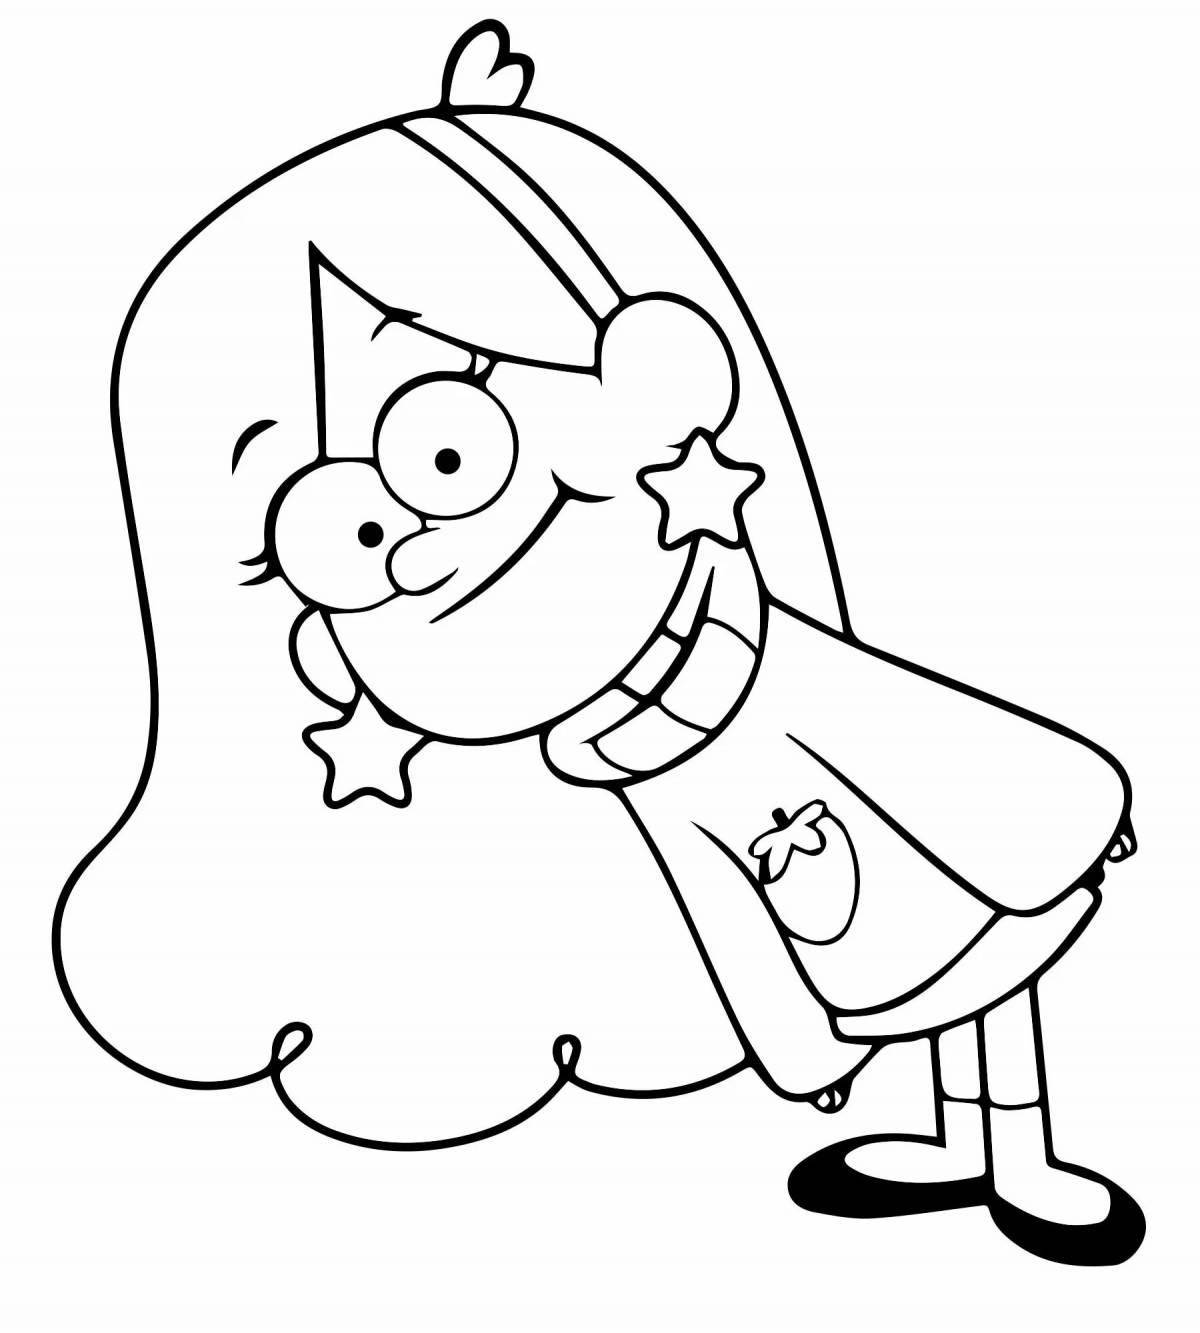 Colorful gravity falls coloring page